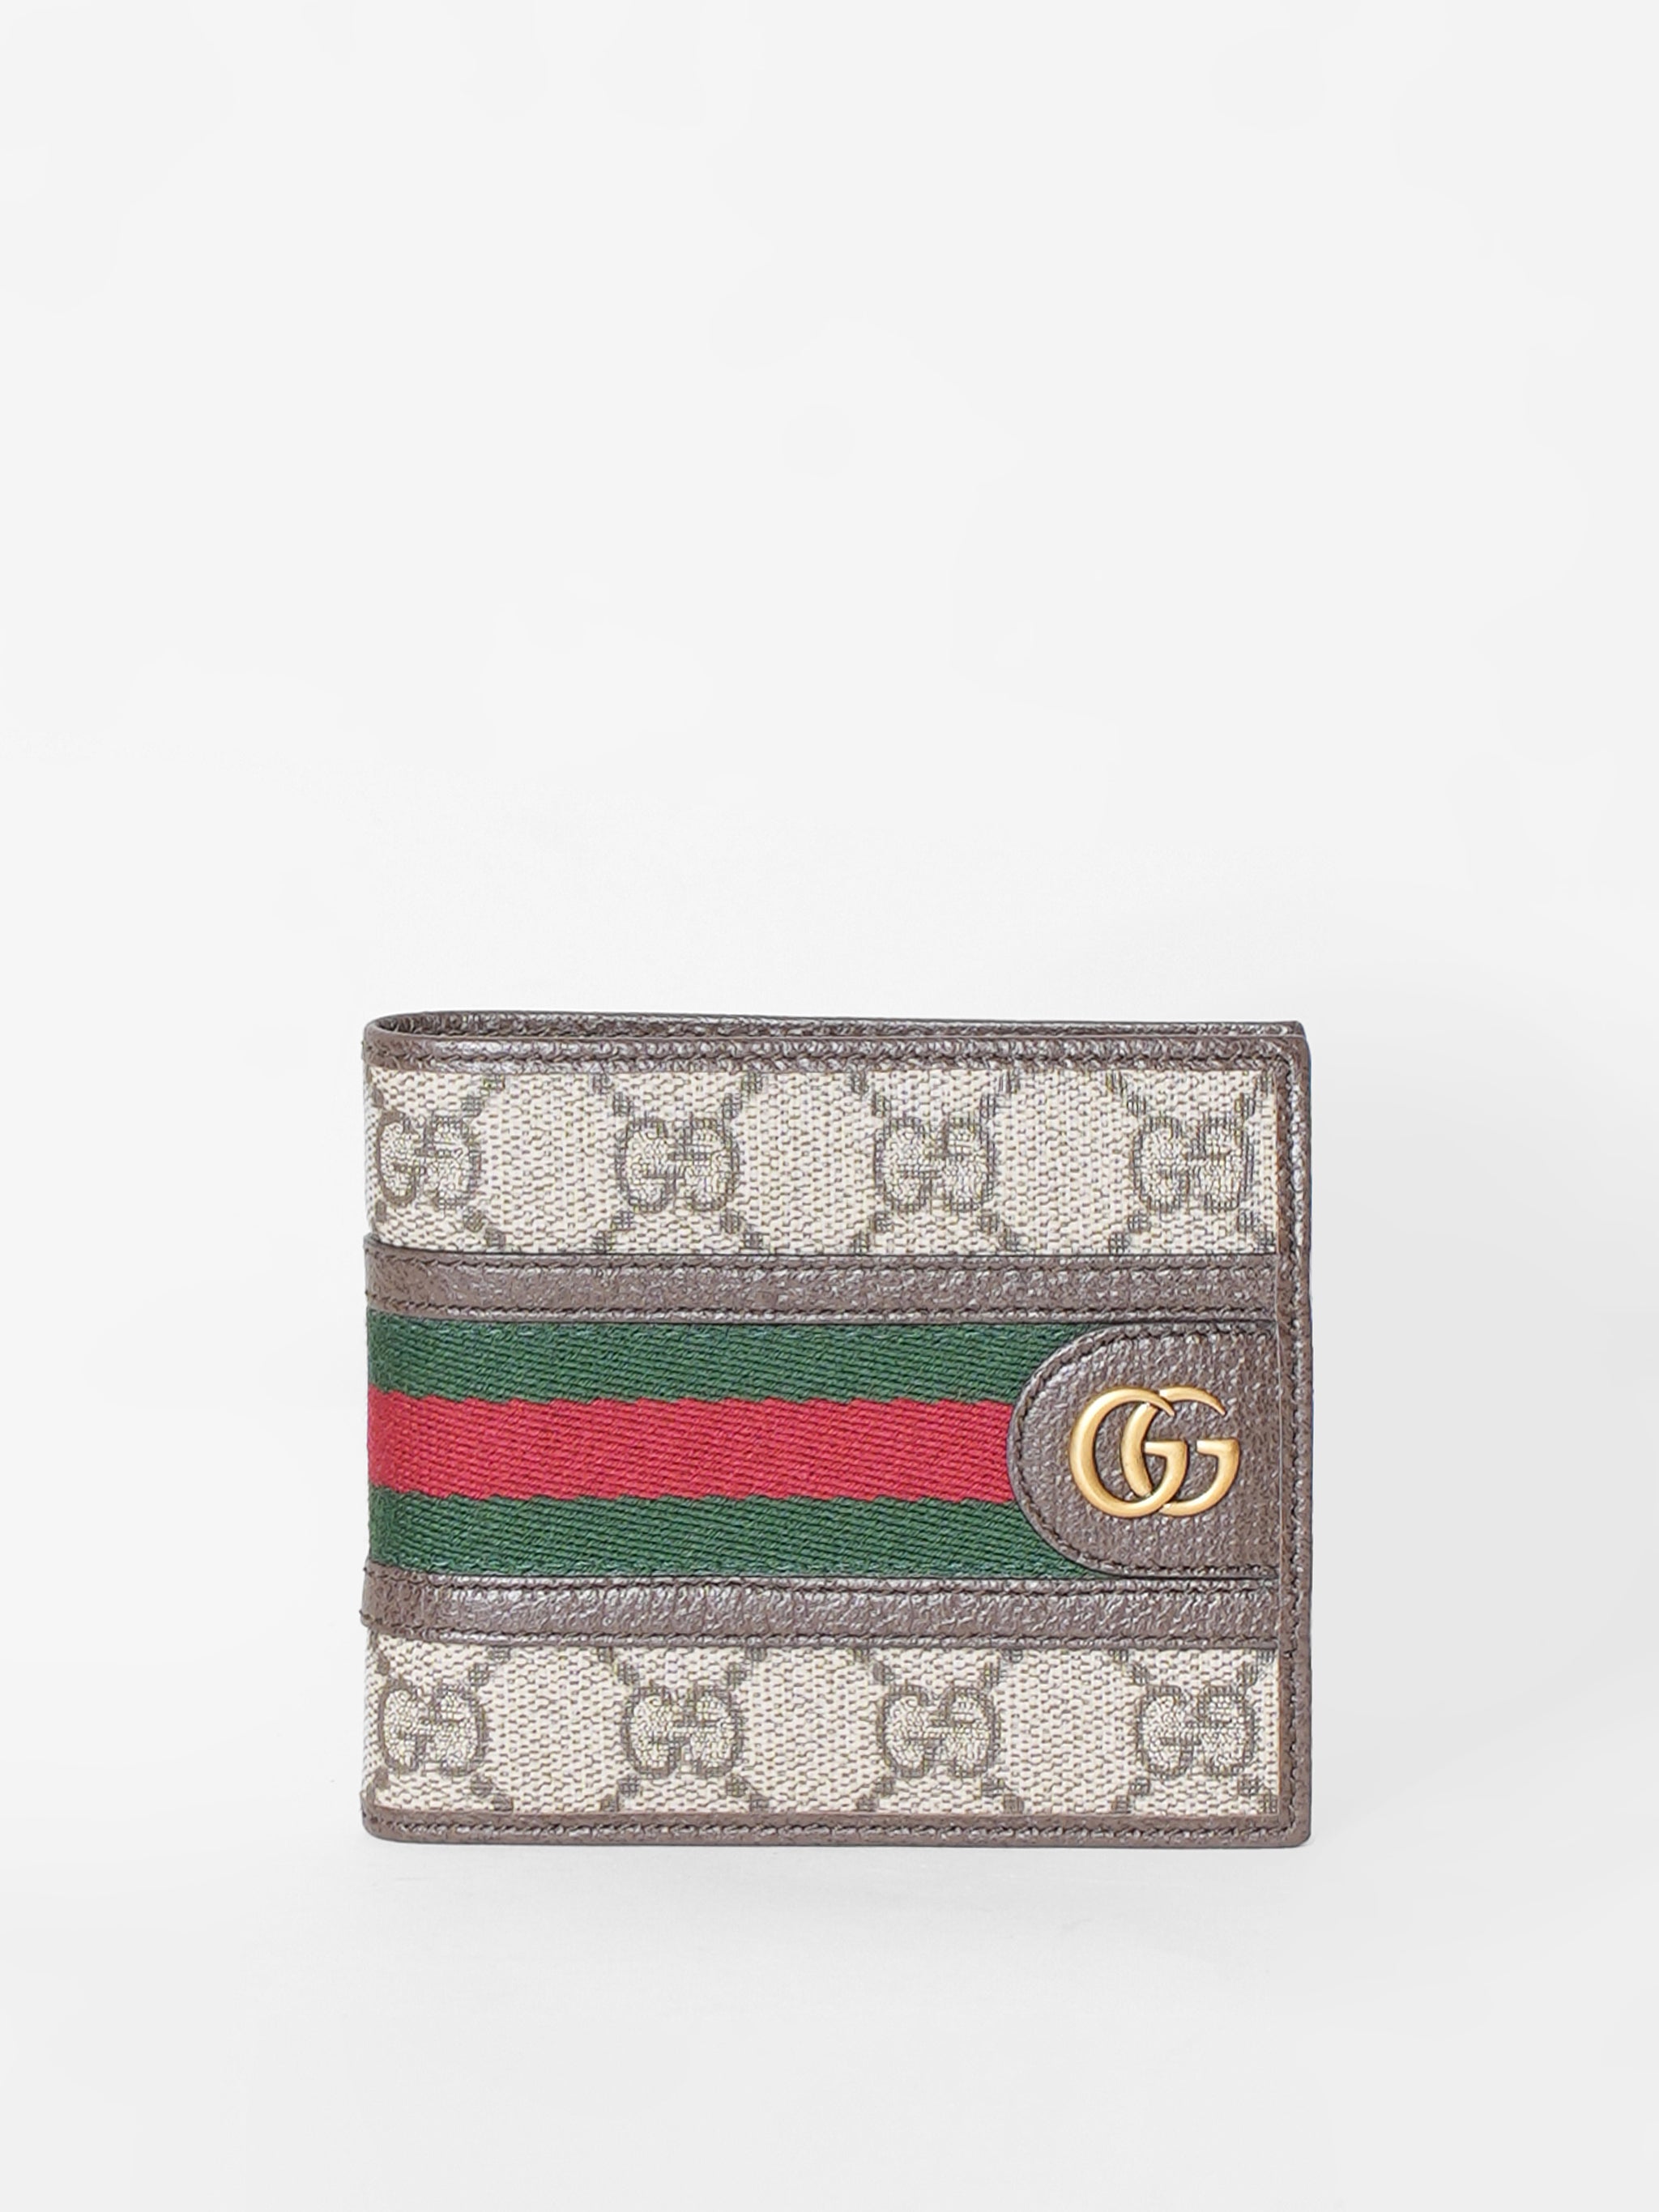 New Gucci Ophidia GG Wallet